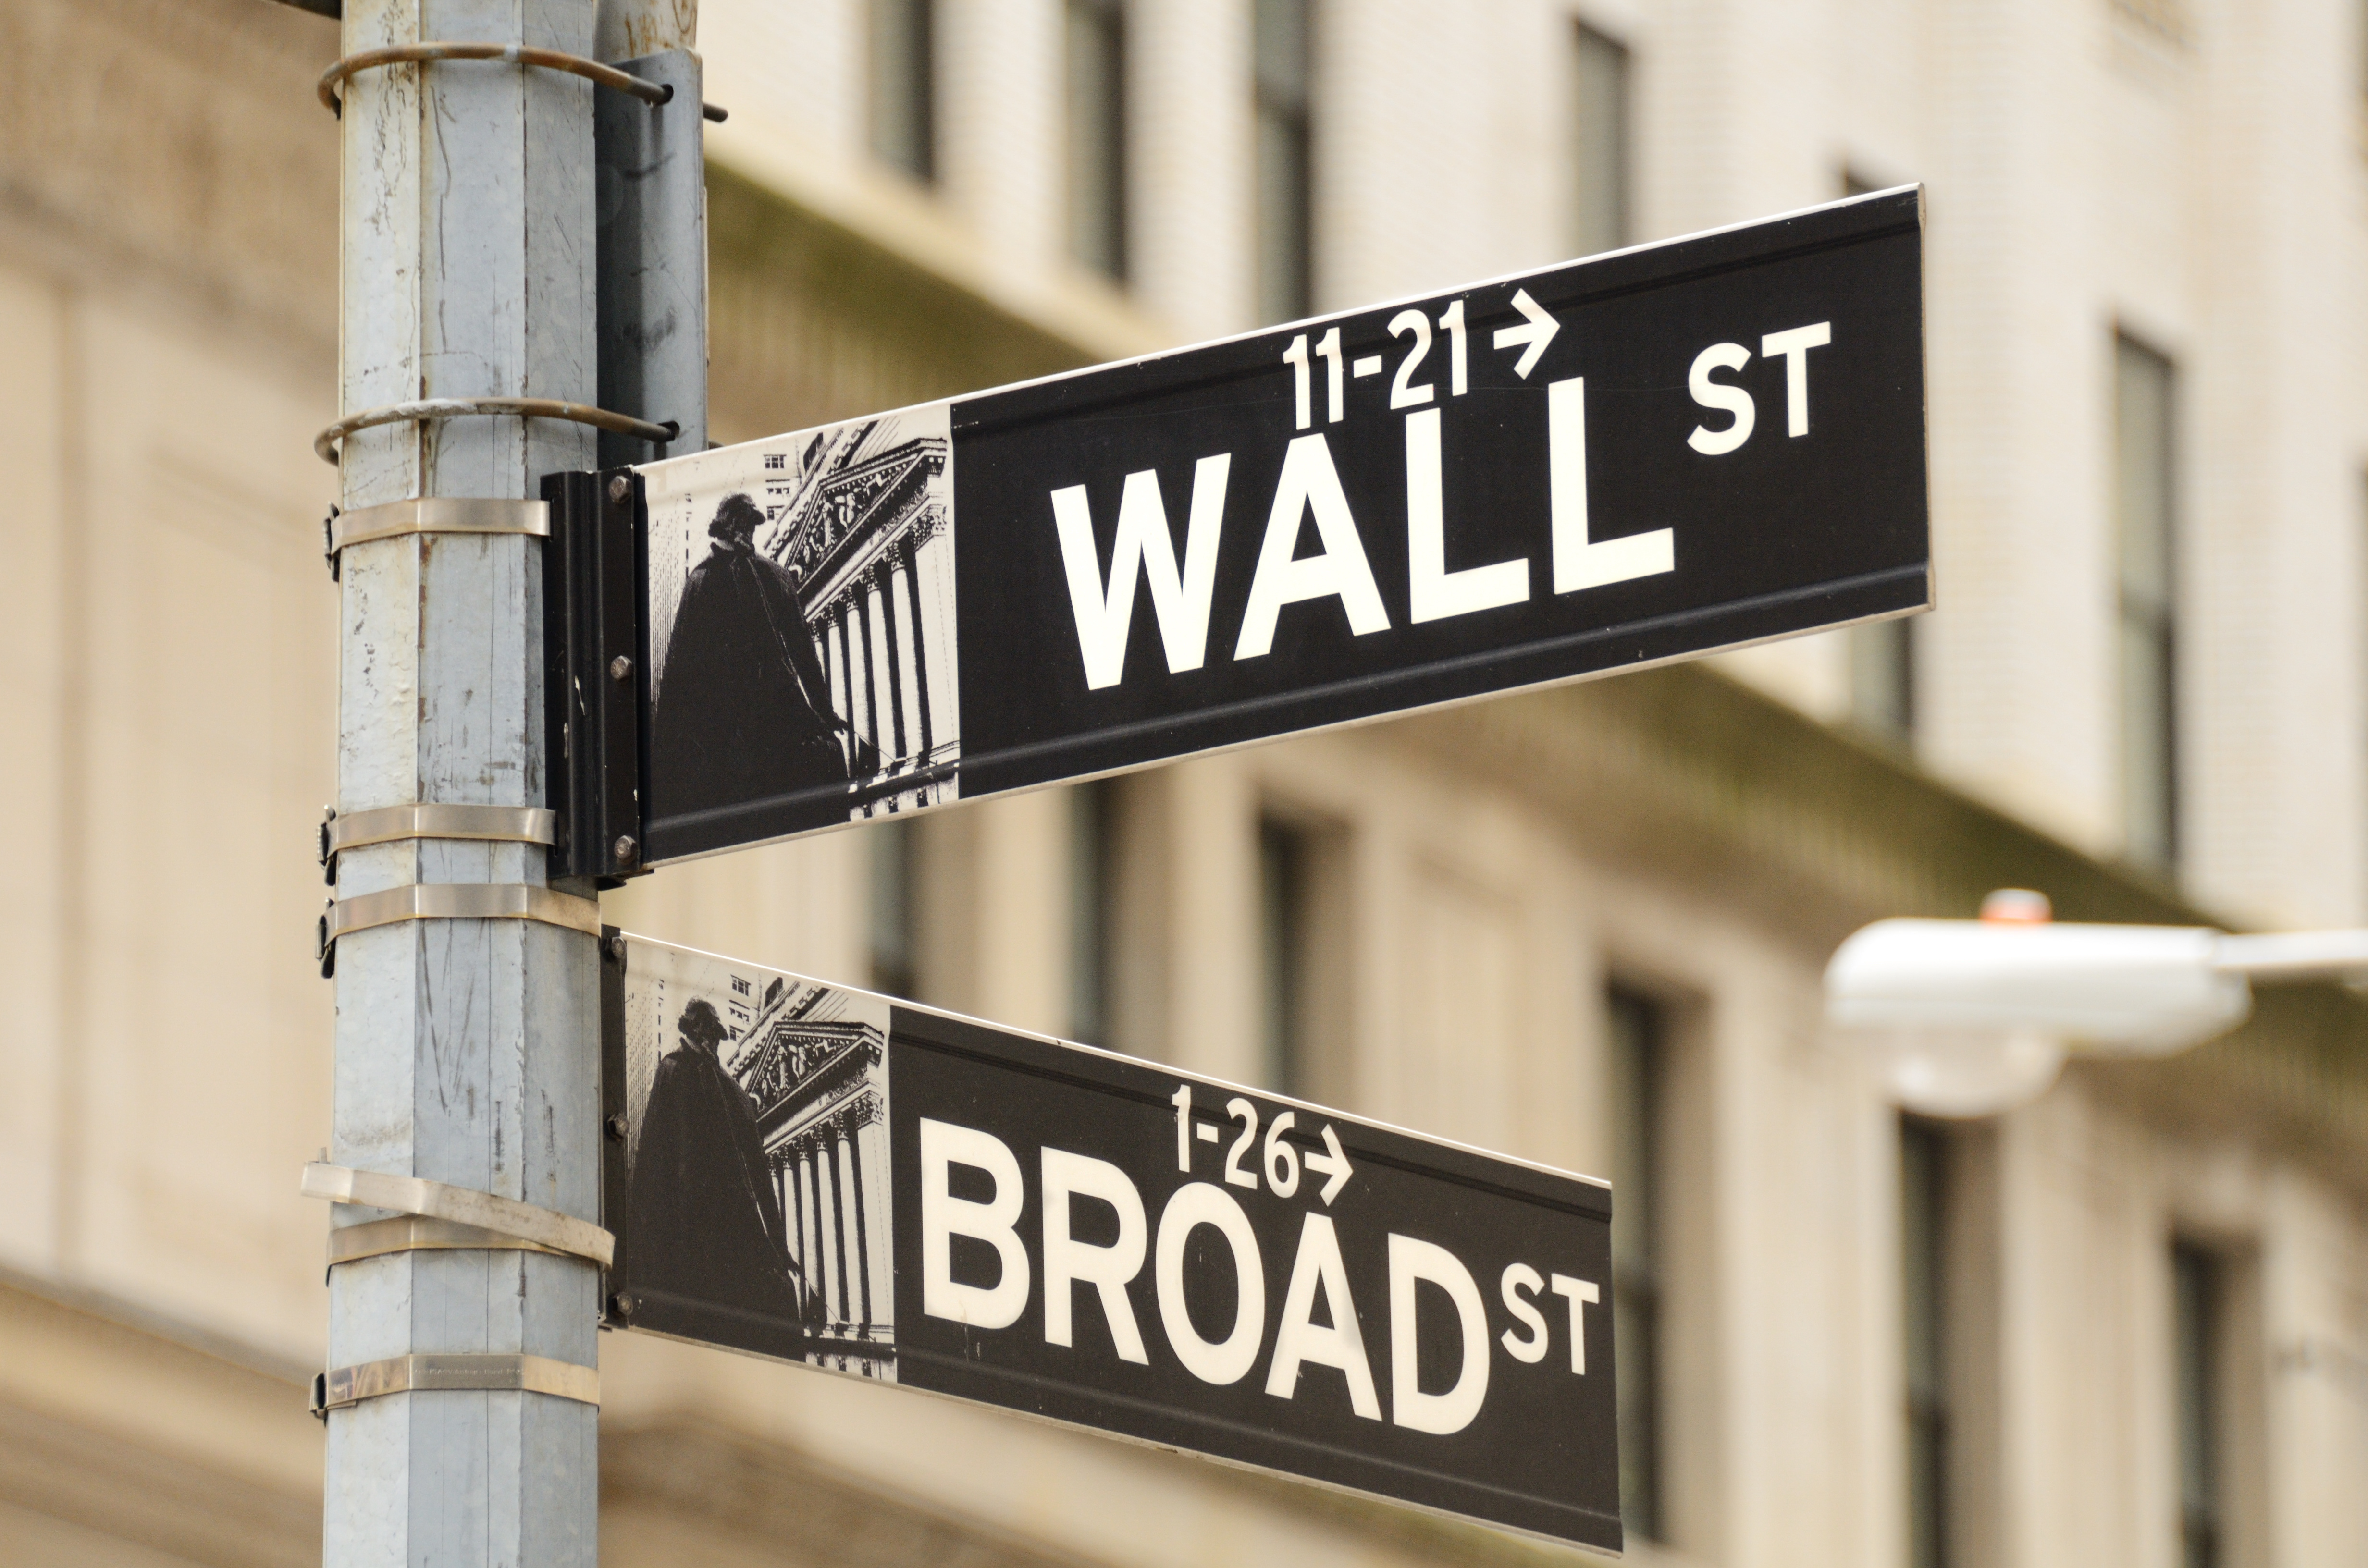 Street sign for Wall Street and Broad Street, the heart of the Financial District of New York City. Image courtesy of Adobe Stock.